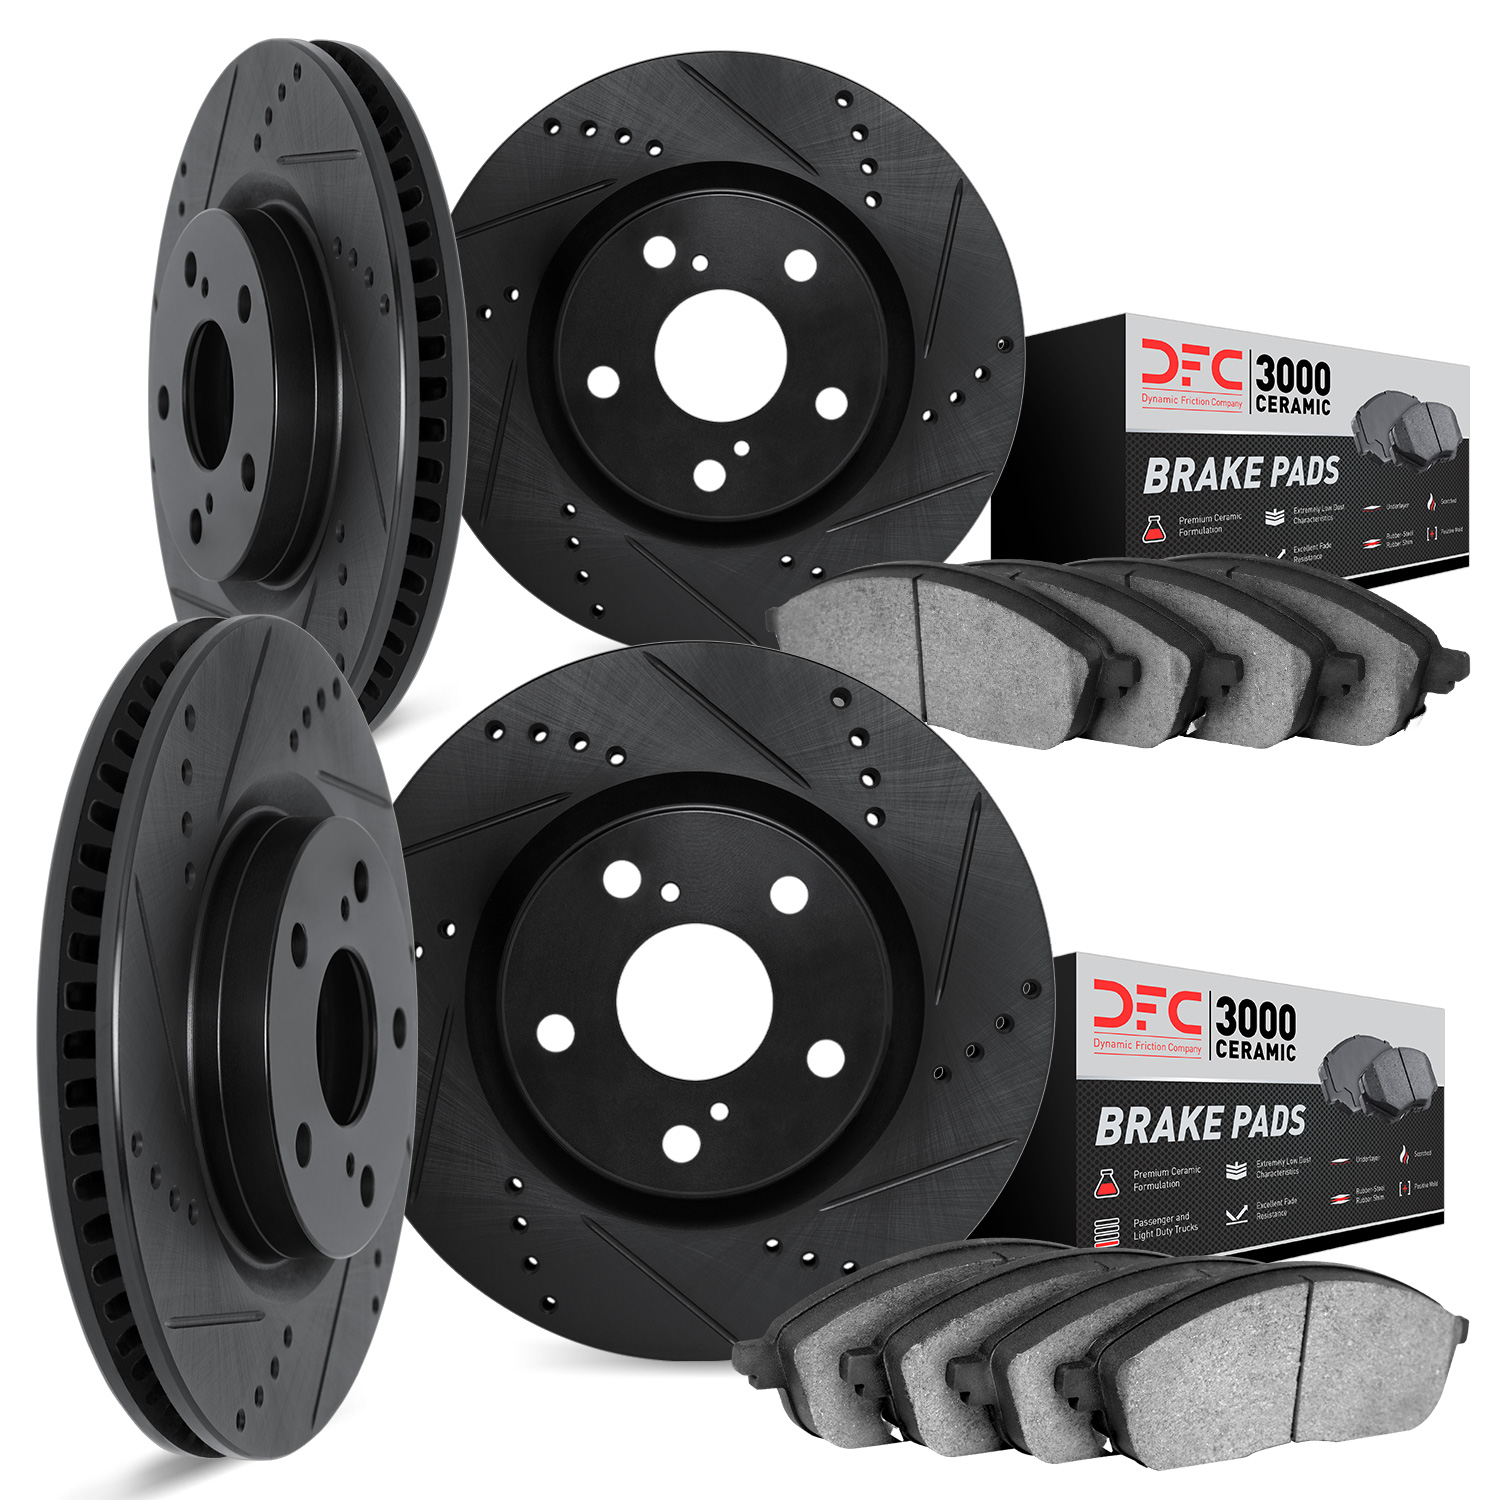 8304-76091 Drilled/Slotted Brake Rotors with 3000-Series Ceramic Brake Pads Kit [Black], Fits Select Lexus/Toyota/Scion, Positio